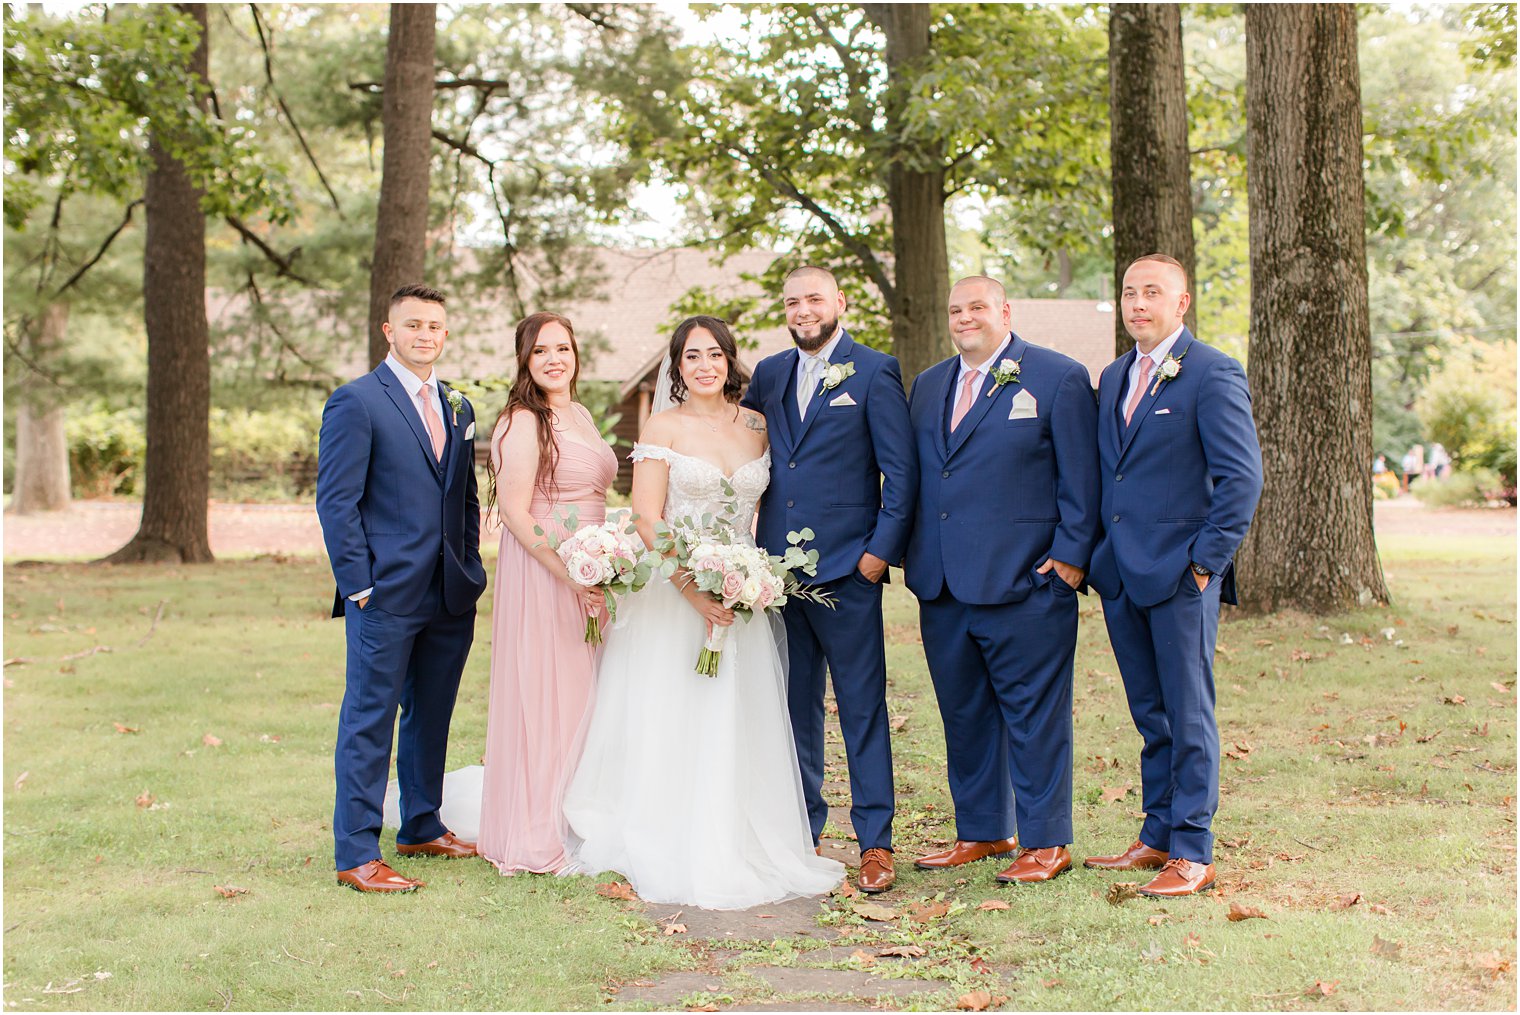 newlyweds pose with wedding party at Rutgers Gardens